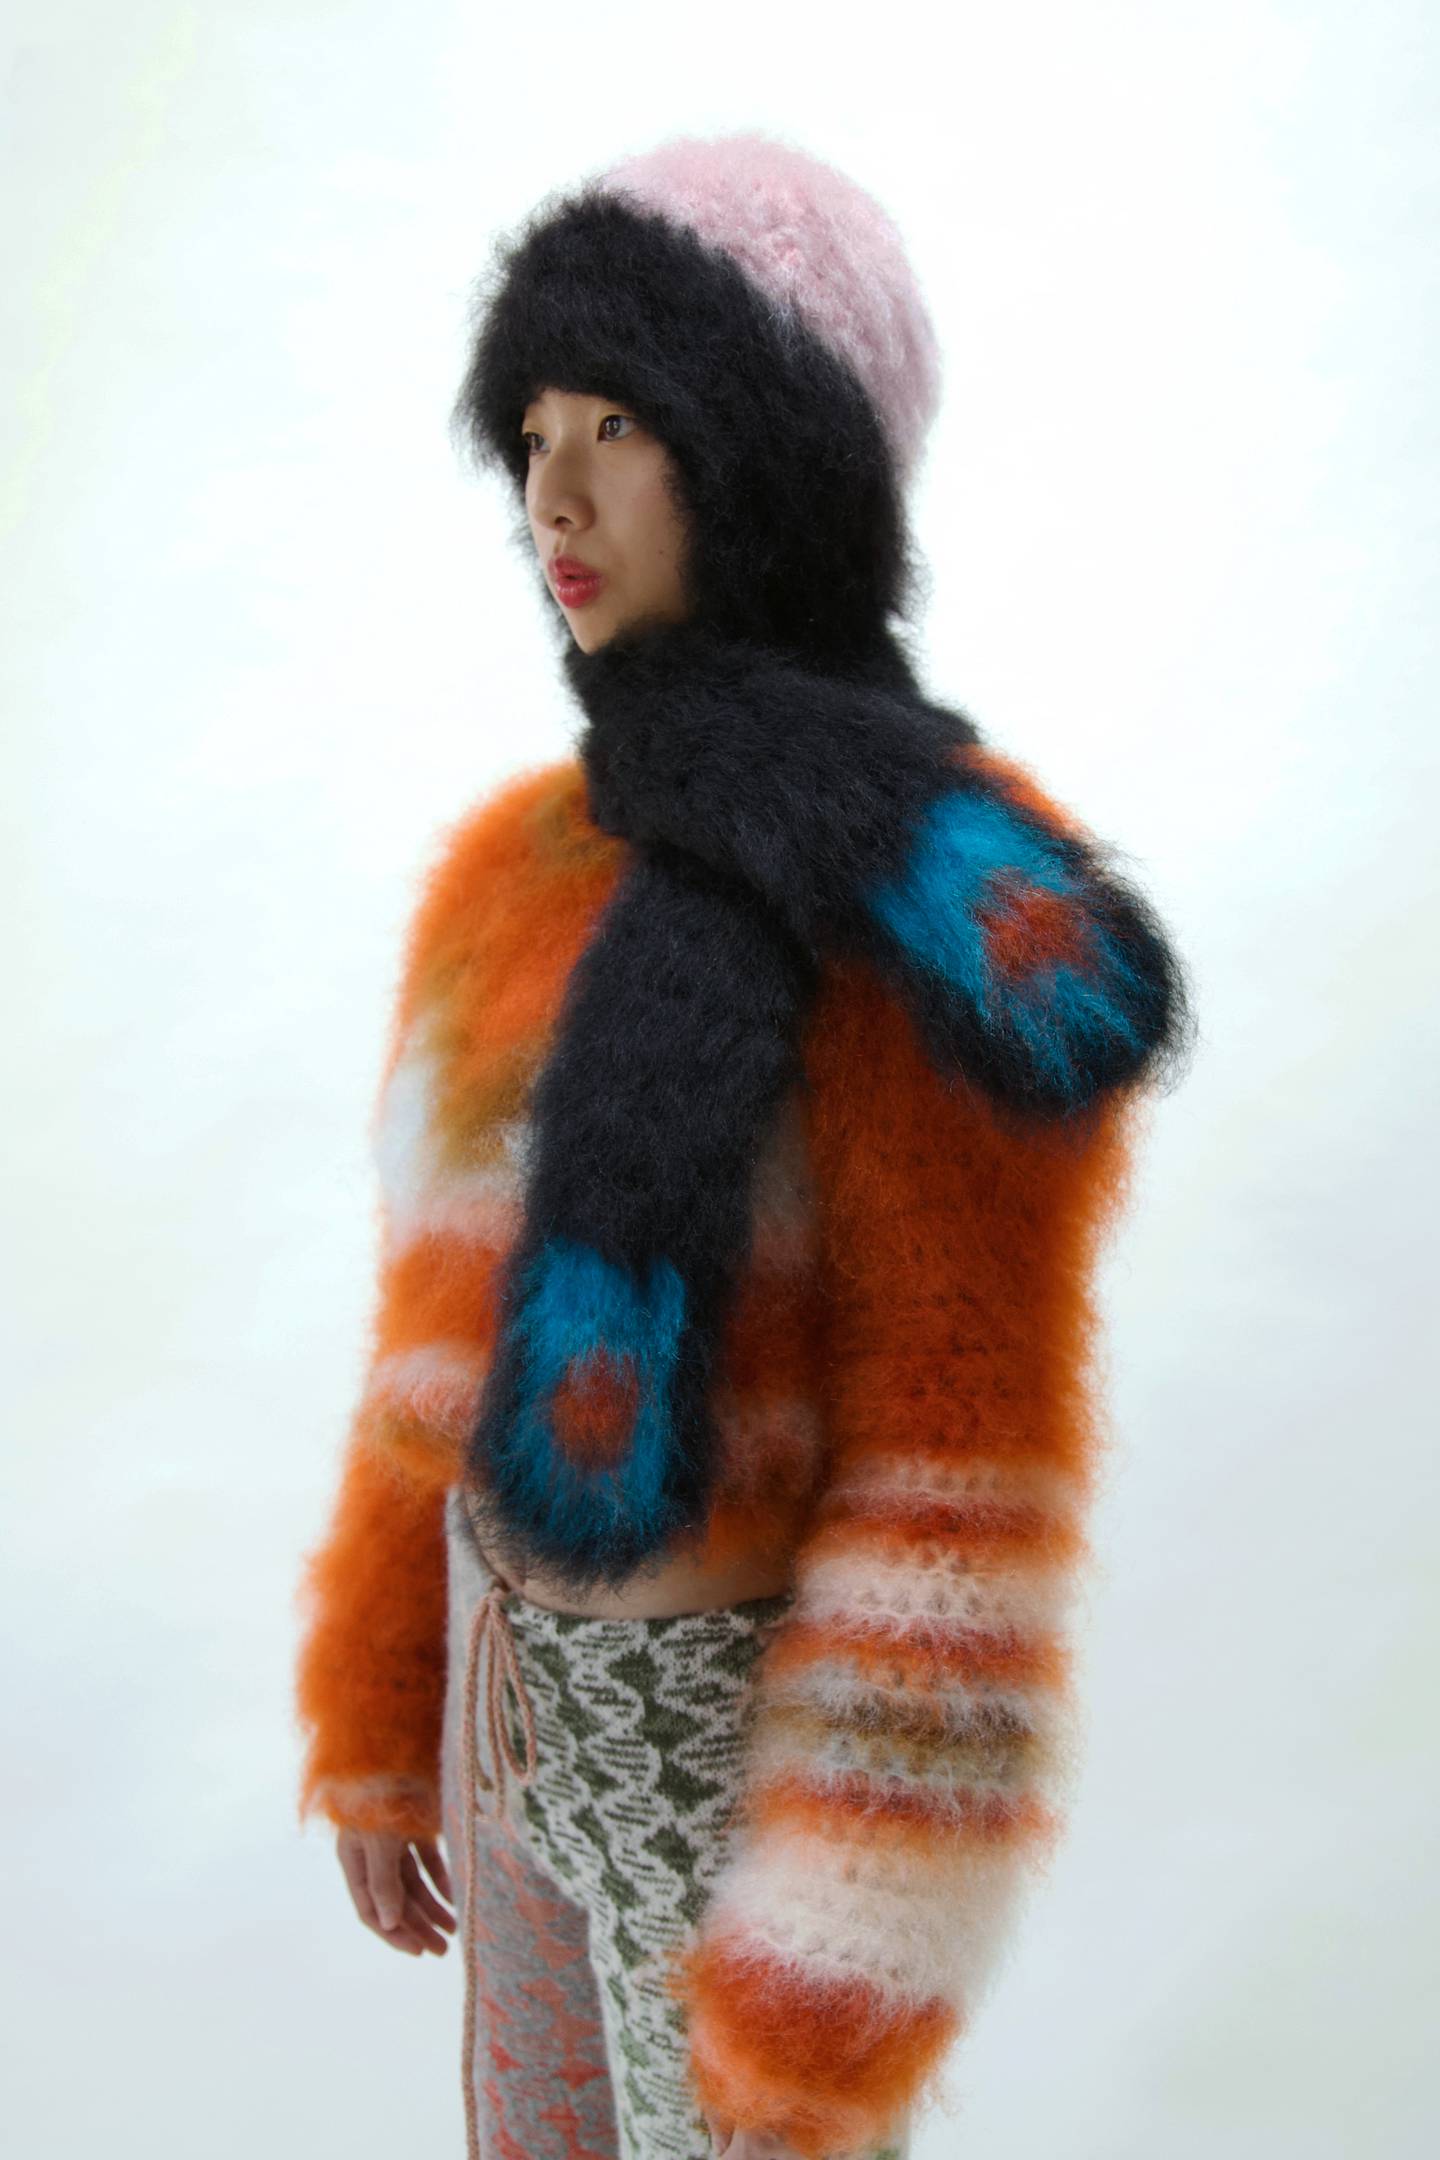 Women wearing a fuzzy hat, scarf and jumper. The hat is pink and black, the scarf is black with bright blue ends and the jumper is bright orange and white stripes.